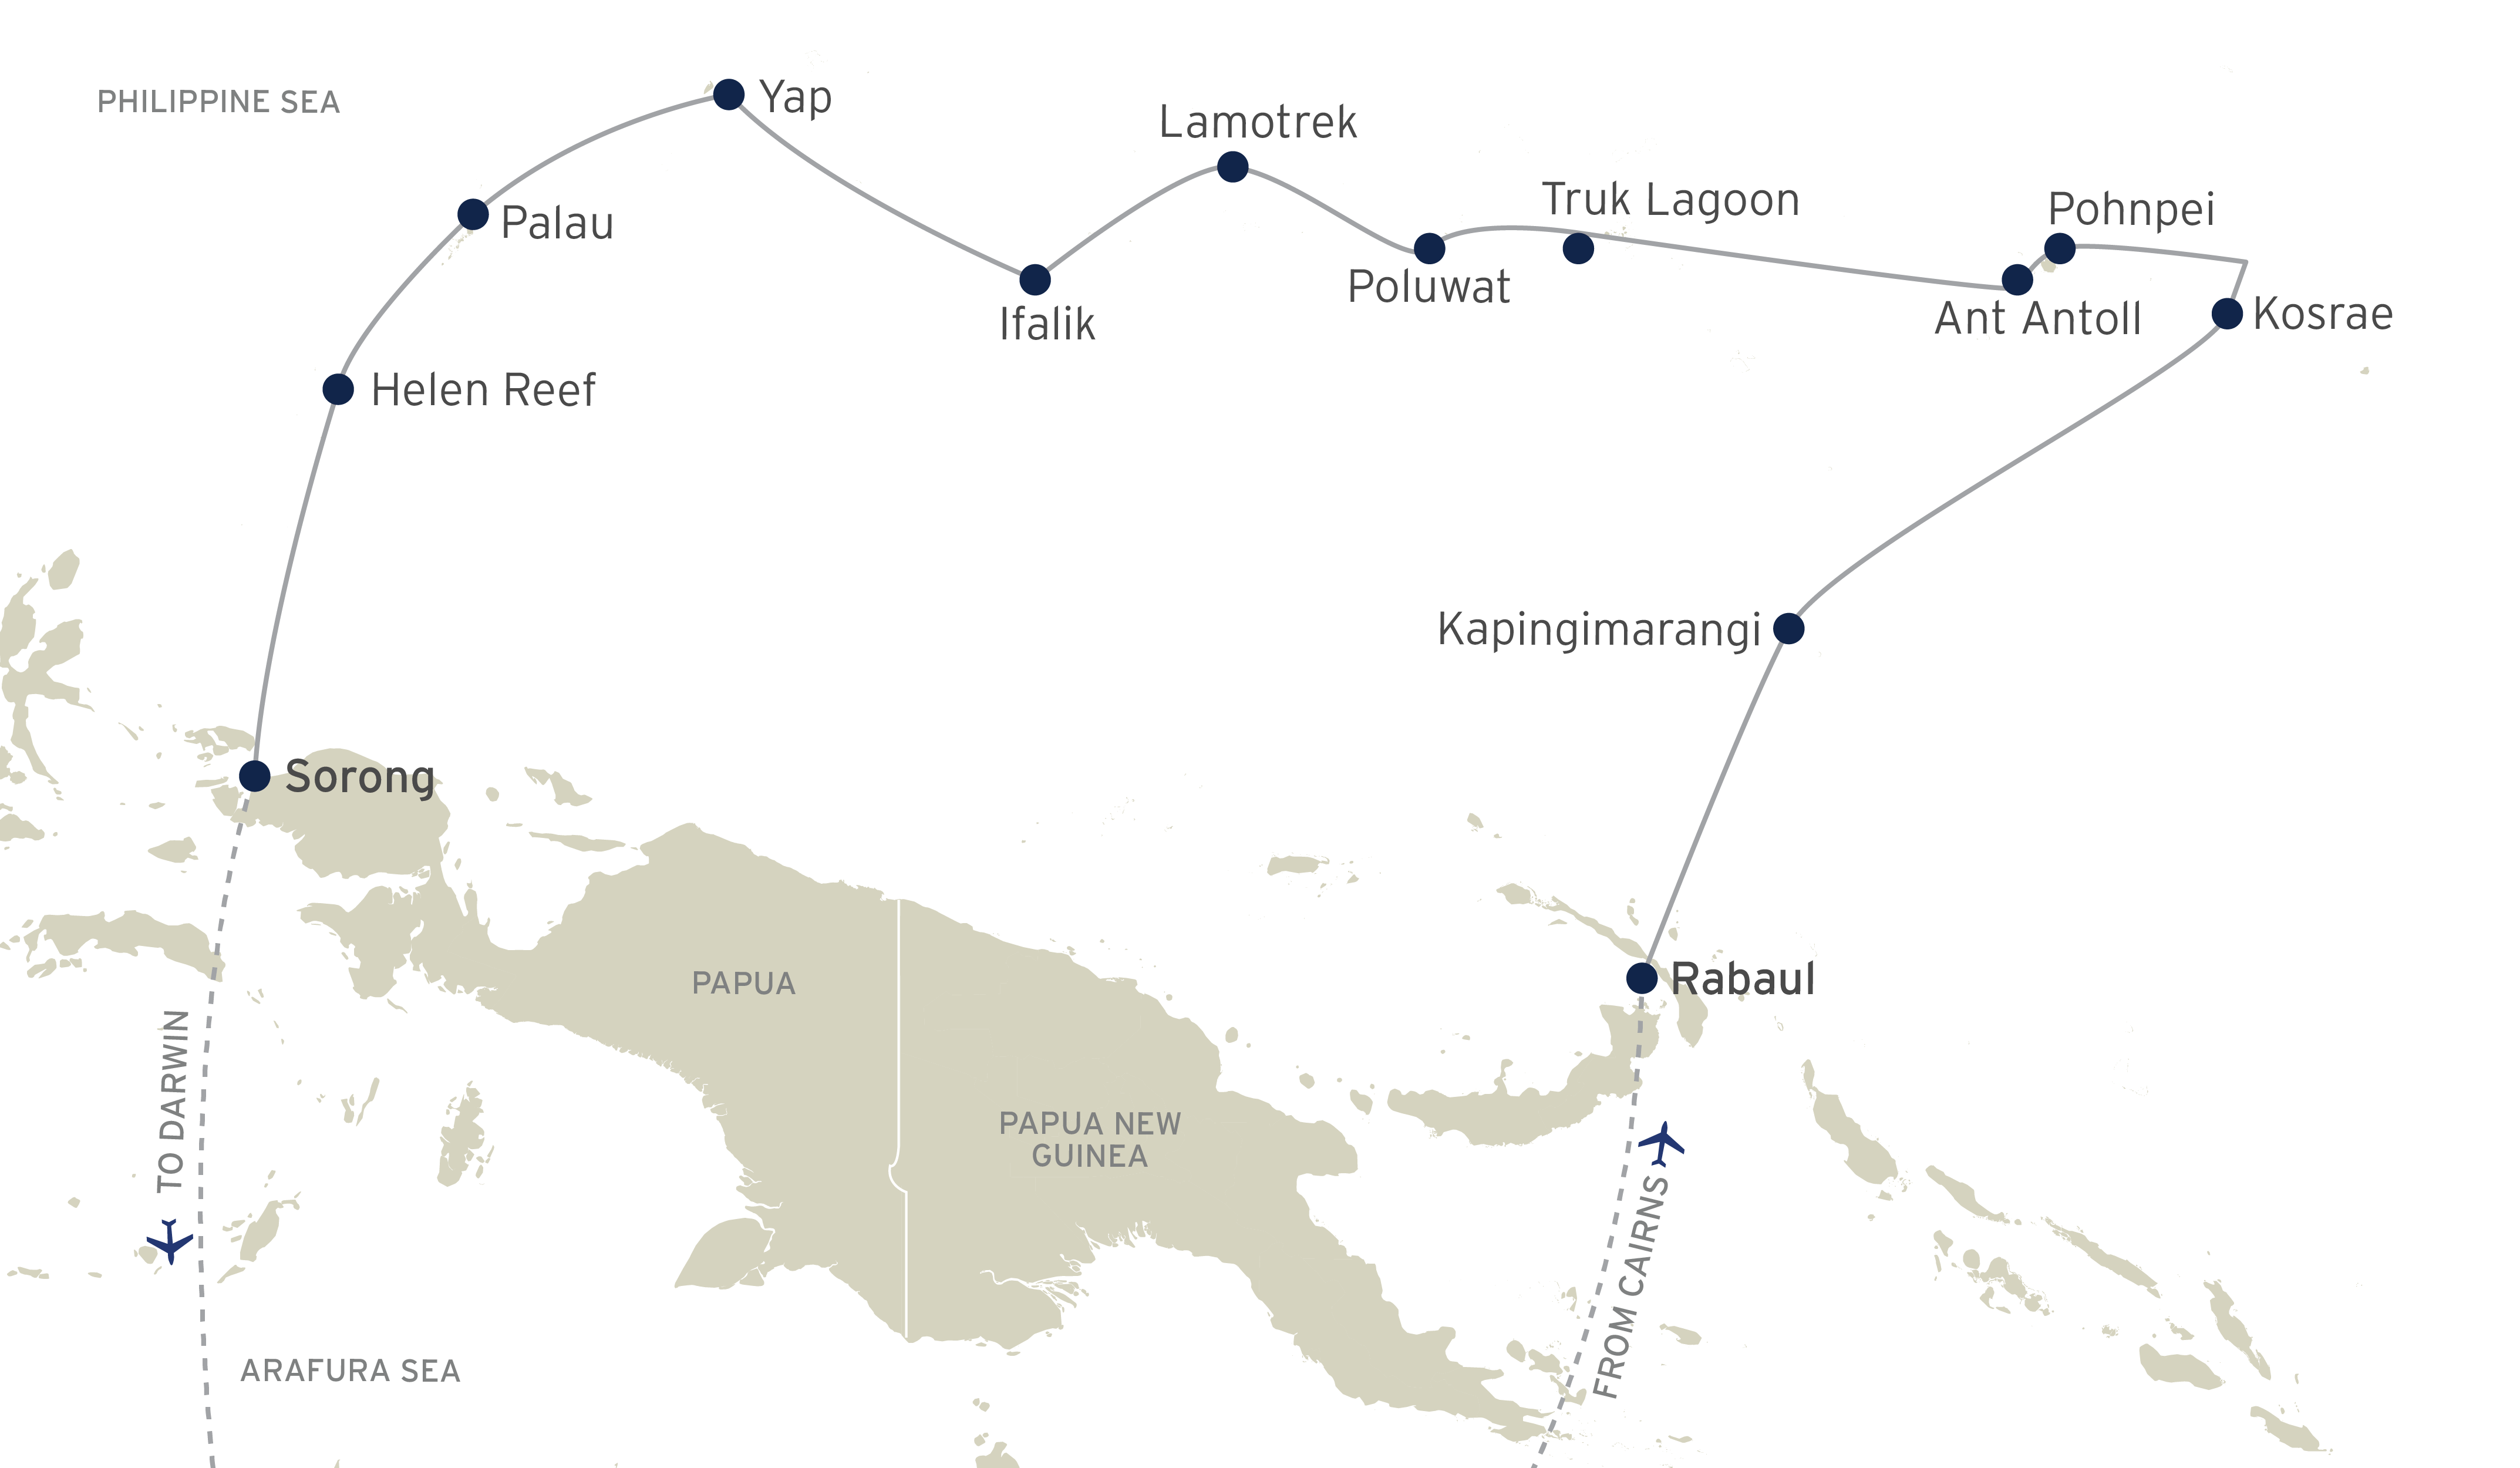 Through the Islands & Atolls of Micronesia route map